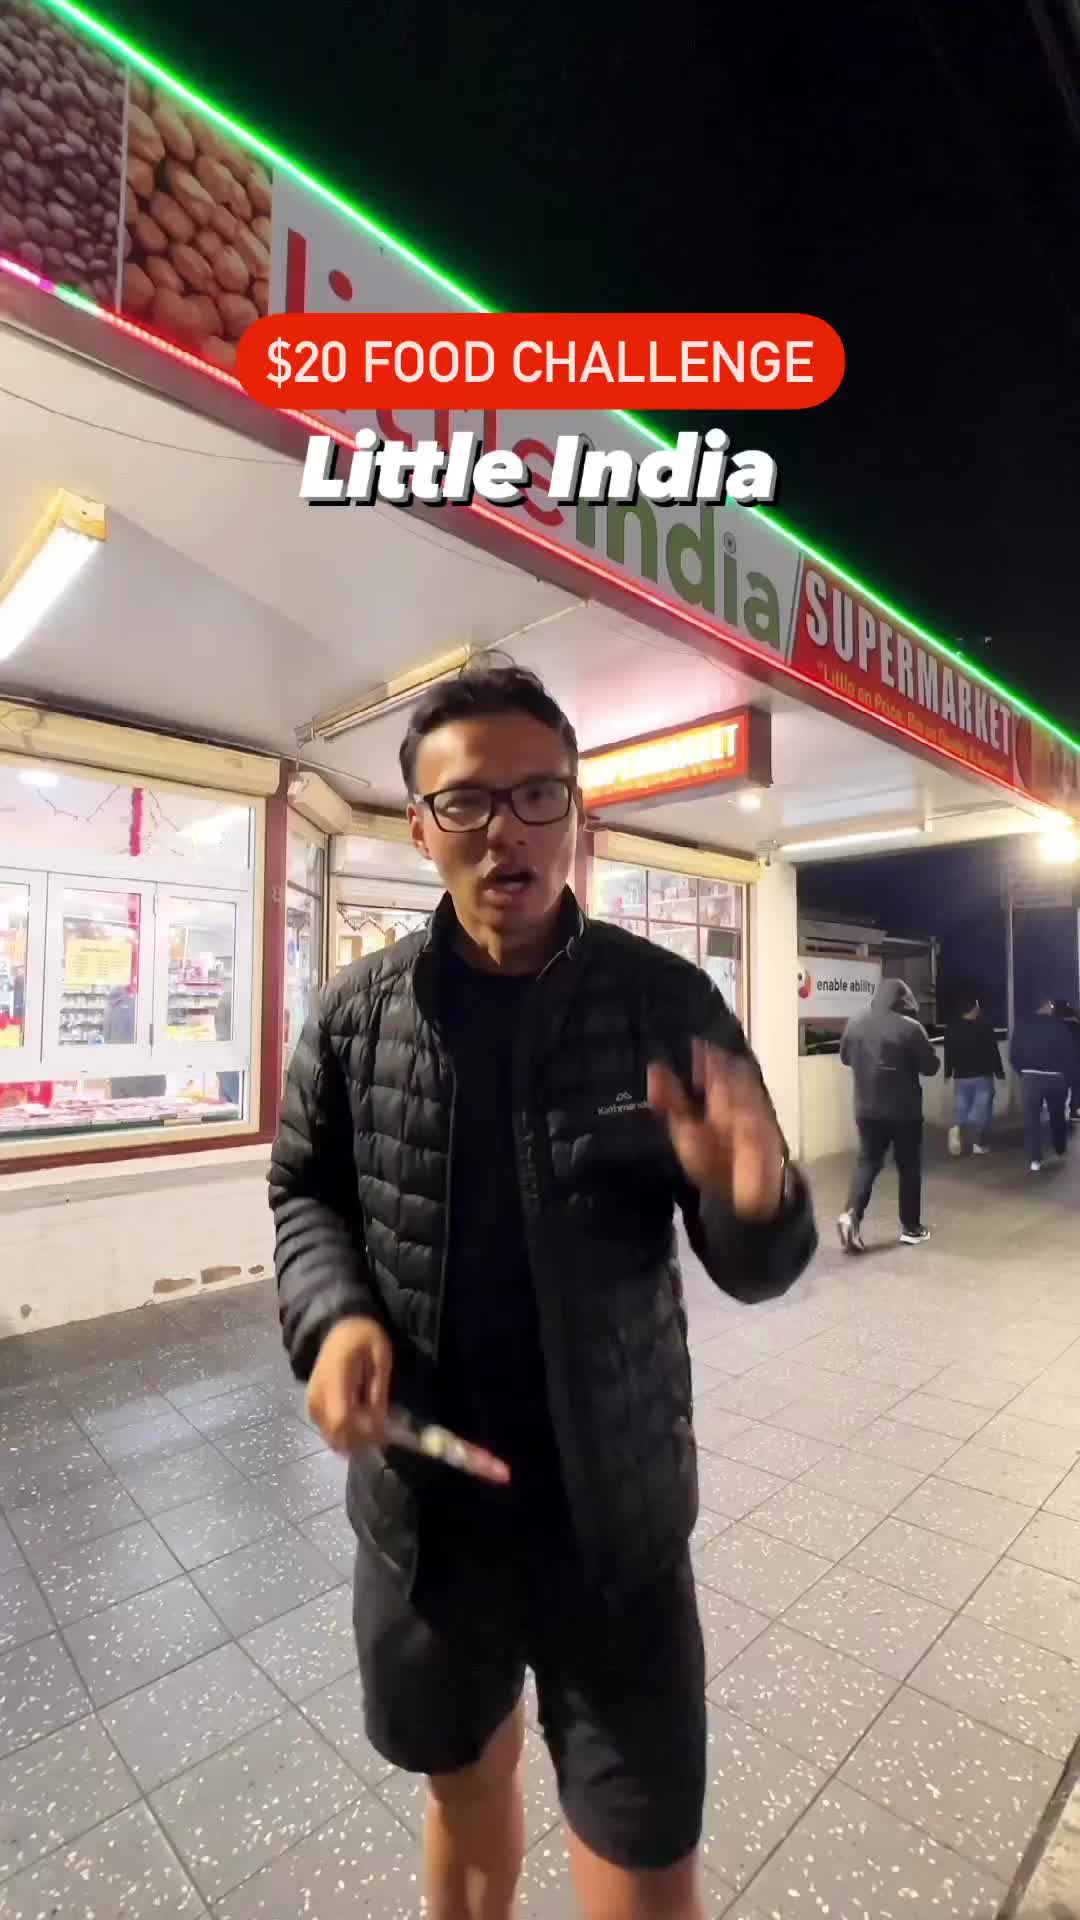 $20 Food Challenge in Sydney's Little India